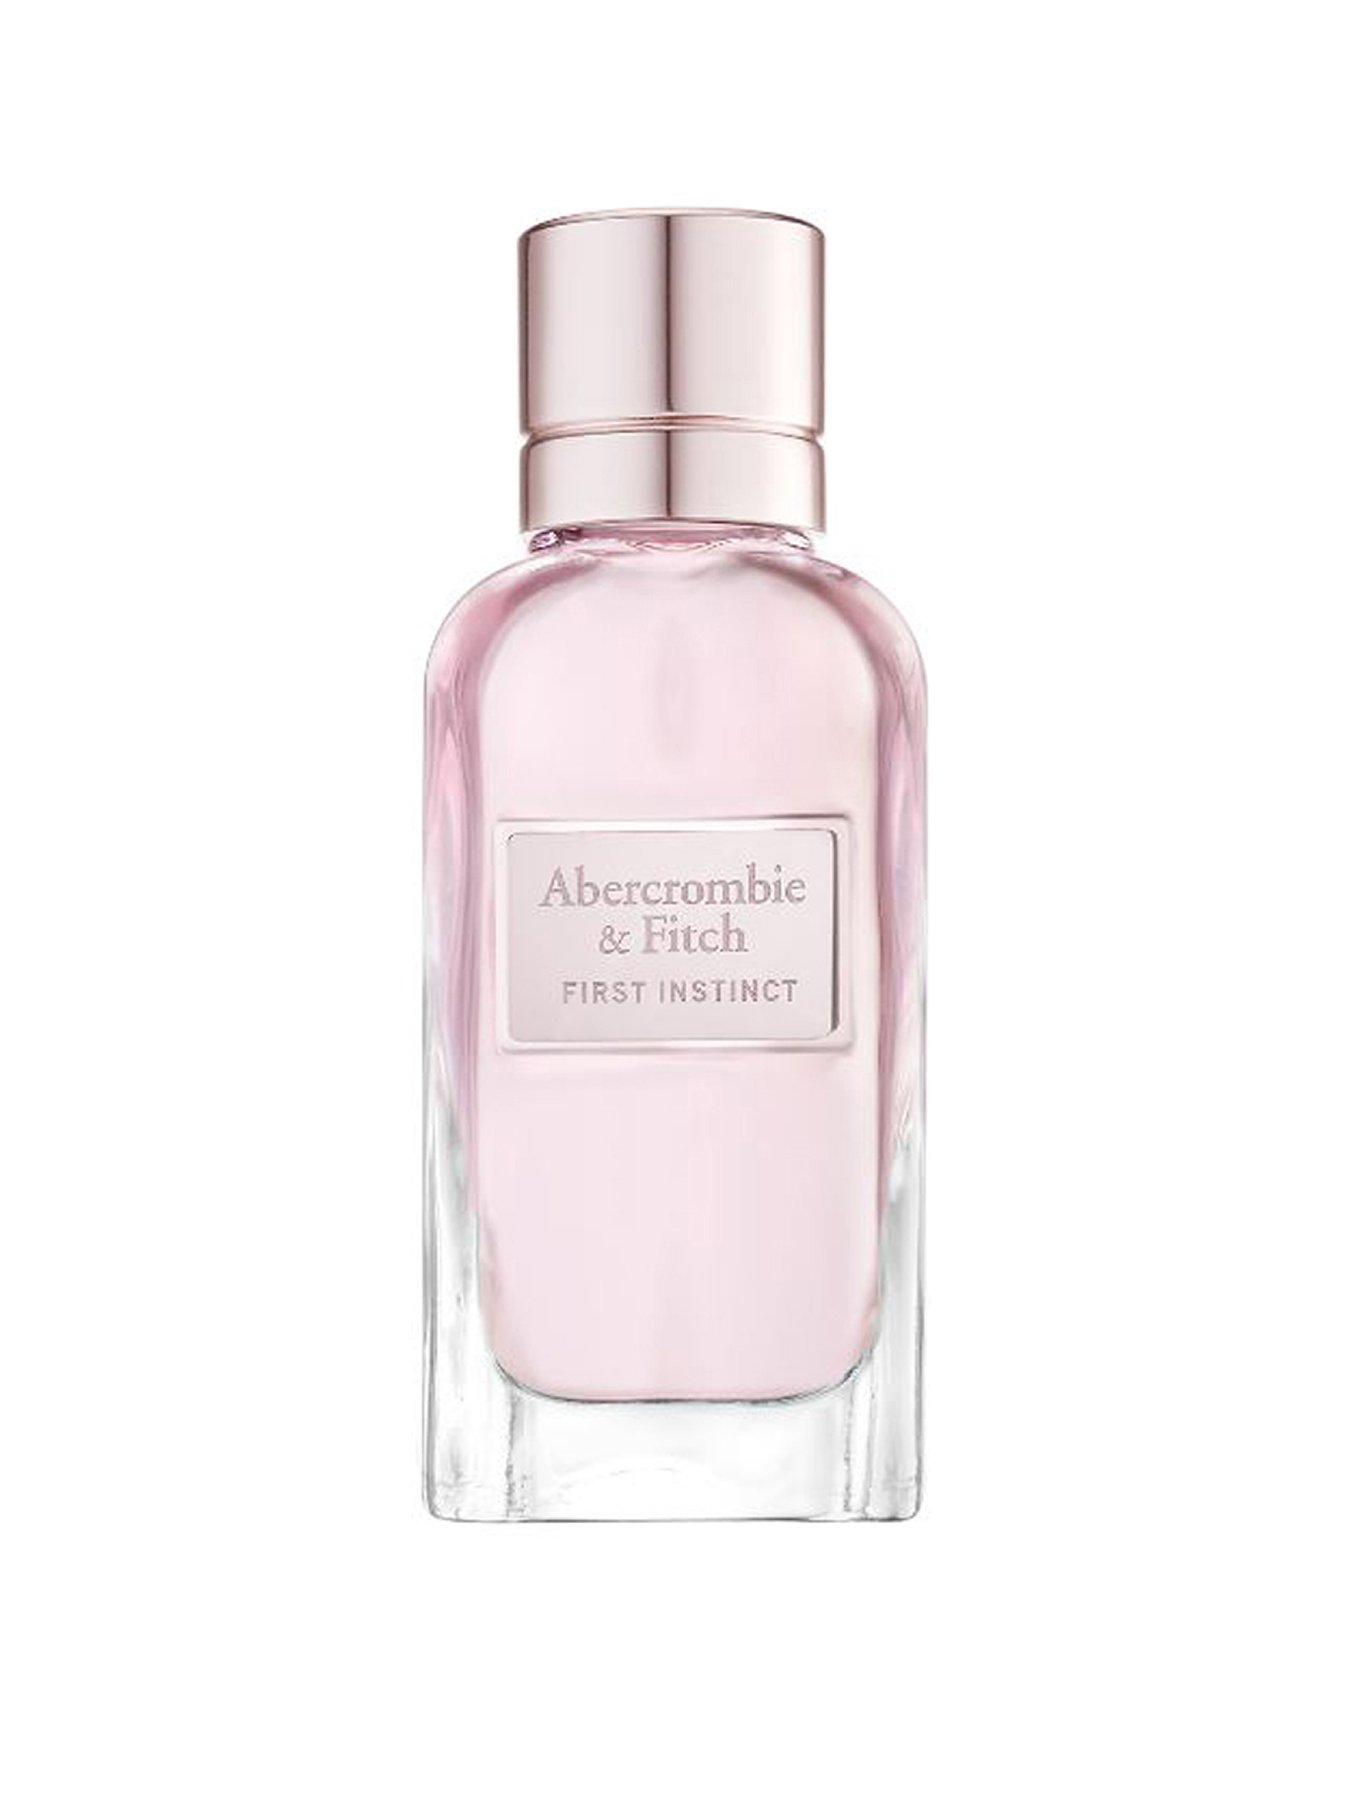 abercrombie and fitch perfume first instinct sheer